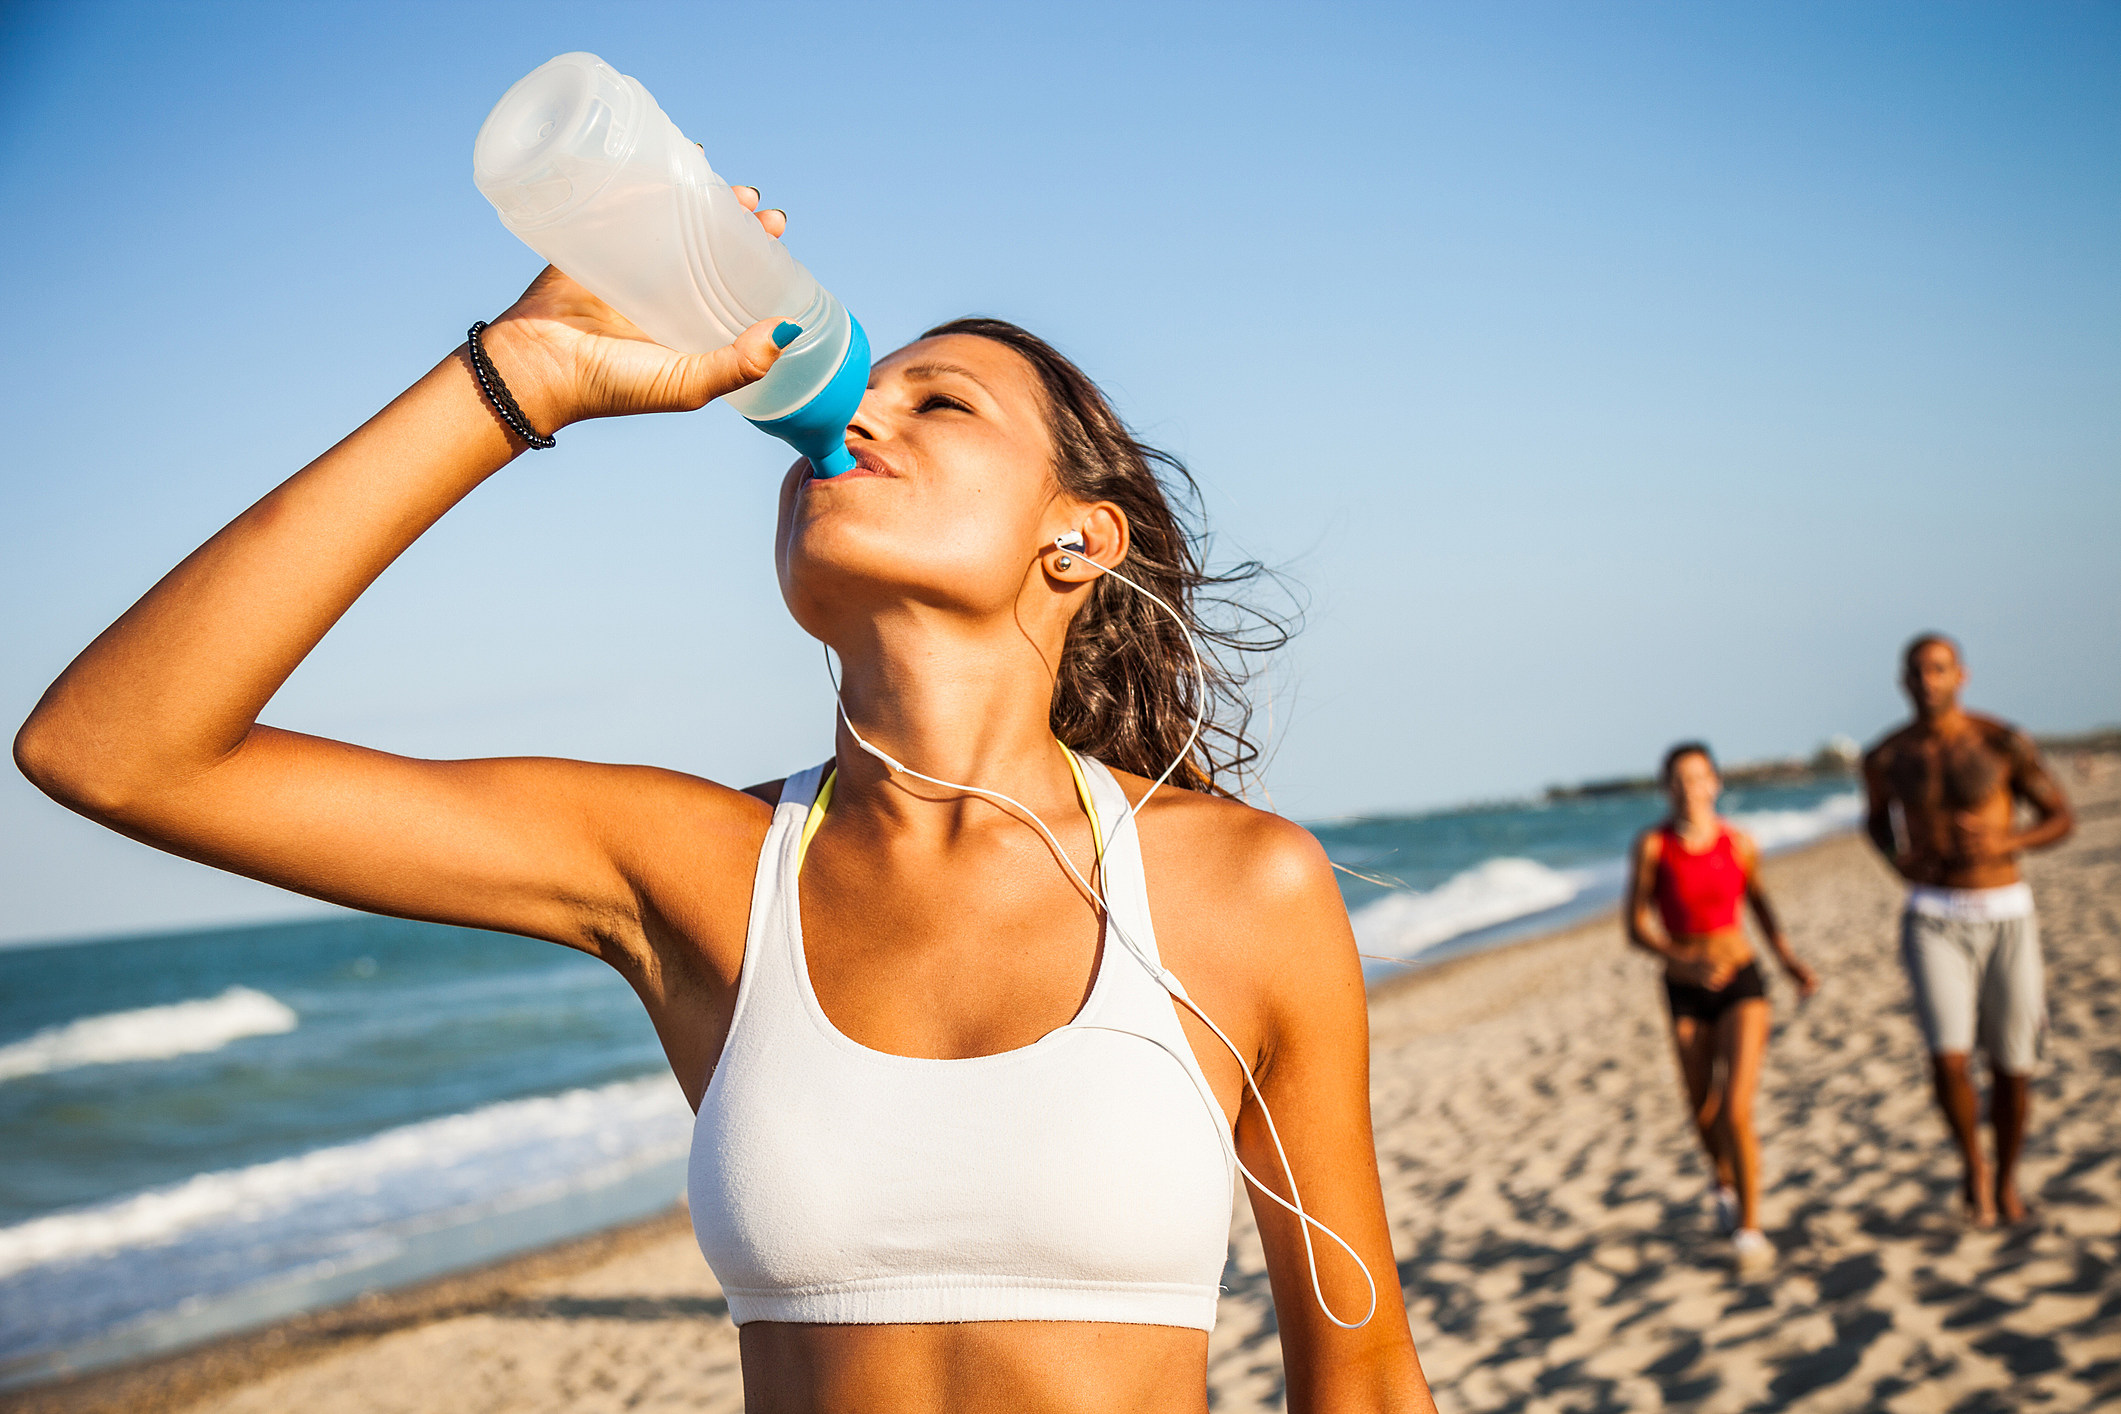 Study: Drink 2/3 of Your Weight in Water a Day to Lose Weight